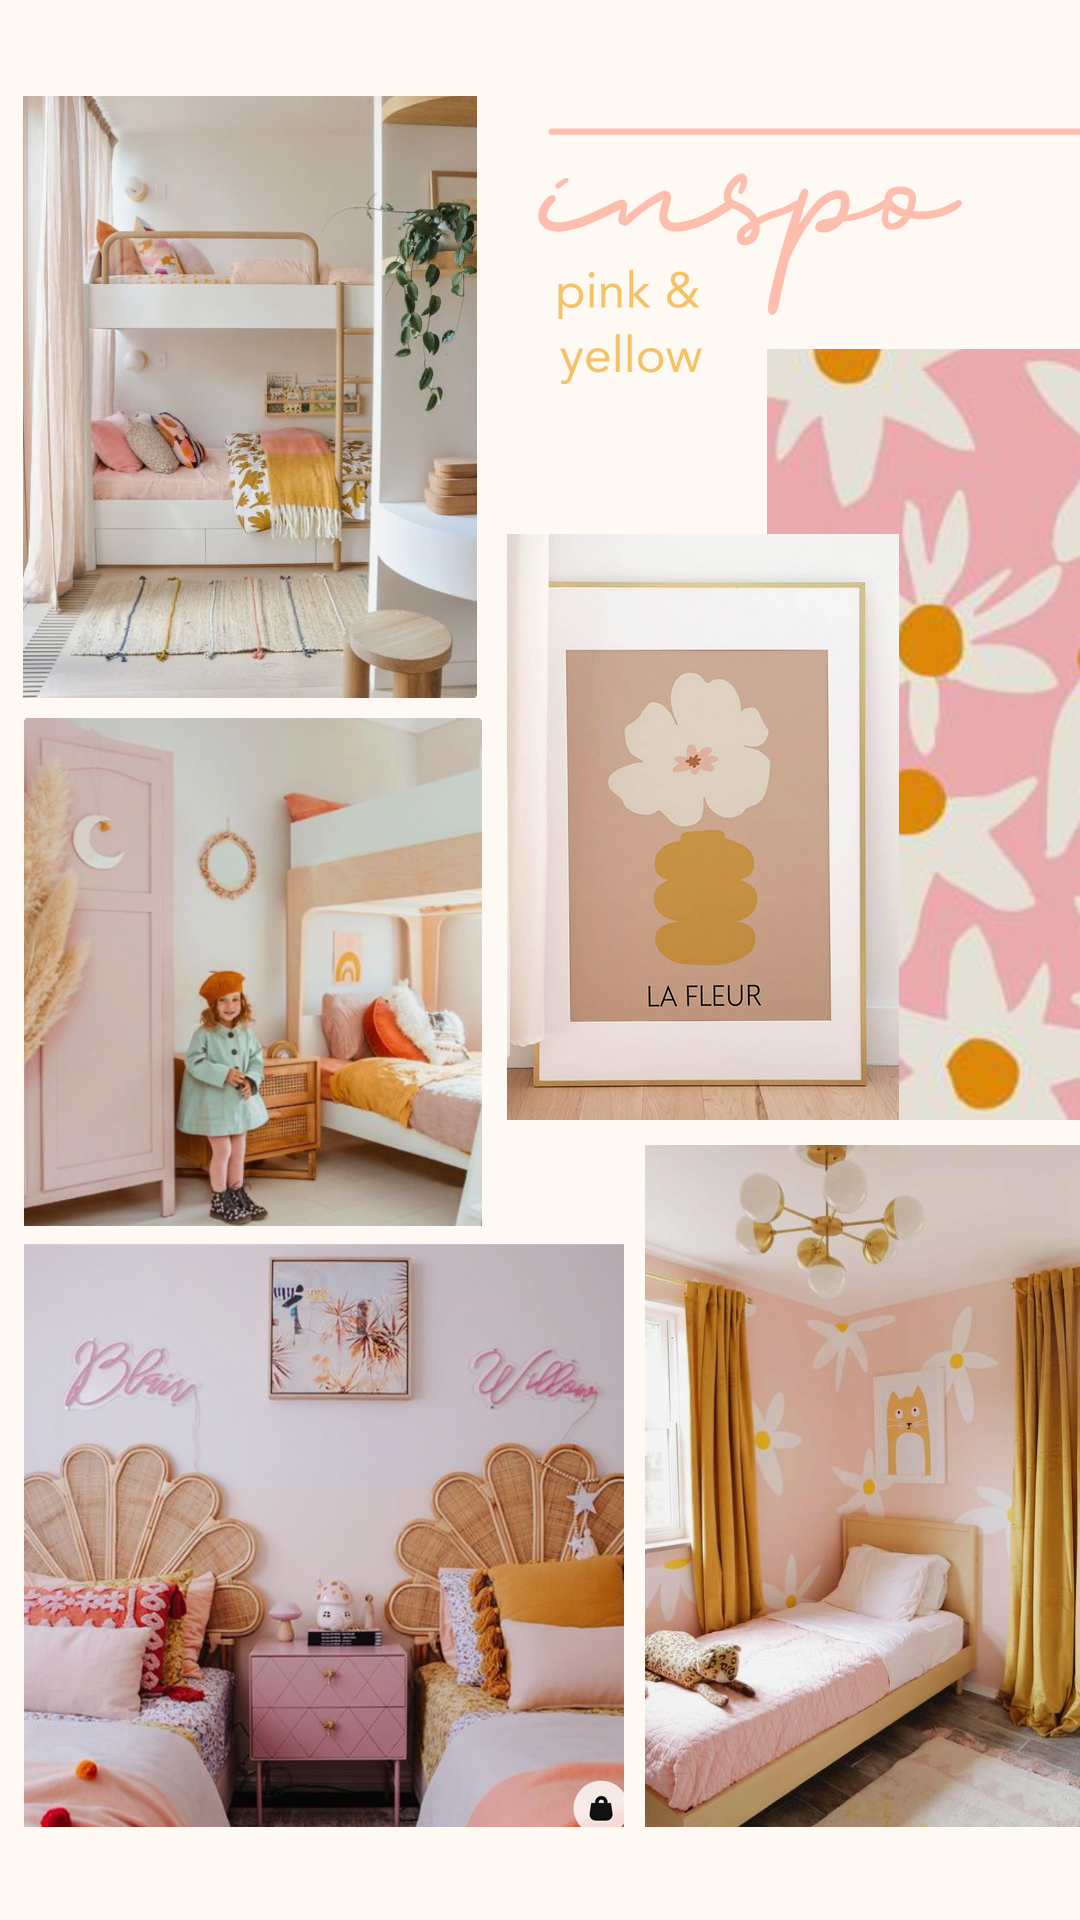 pink and yellow mood board for a girls bedroom by baba souk